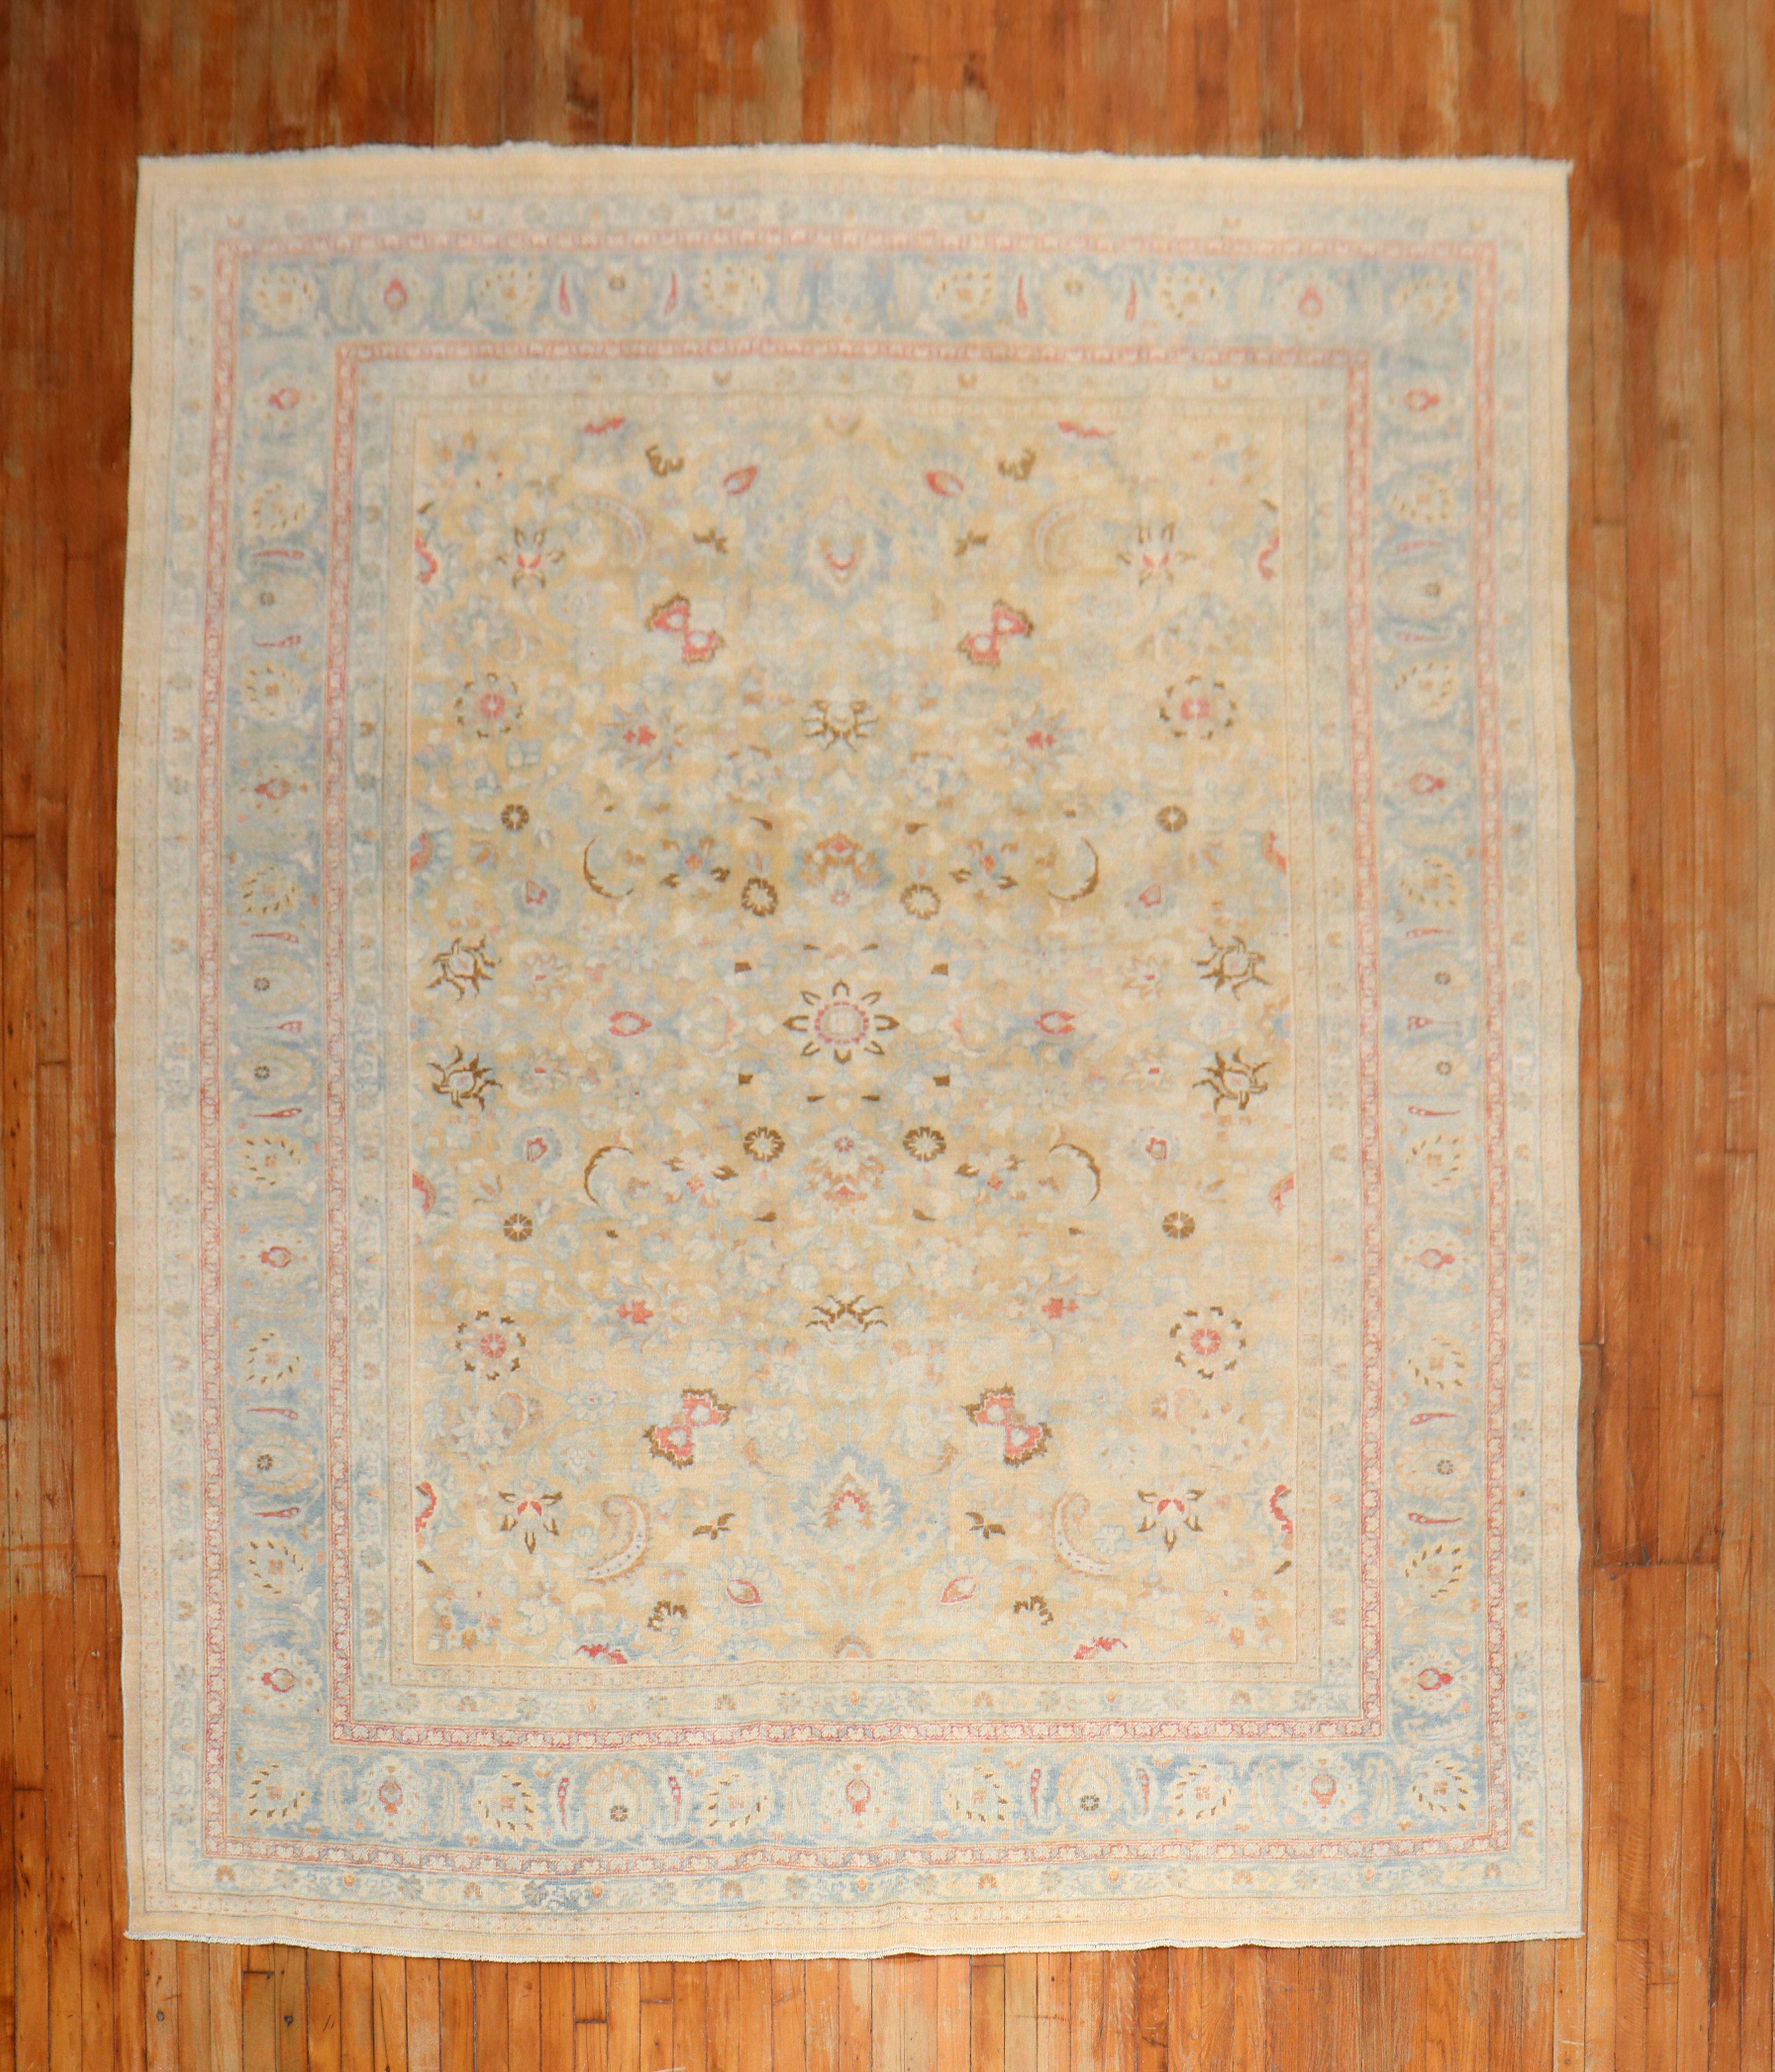 A room-size Persian Meshed rug with an all-over formal design on a wheat field, an icy blue border, accent colors in red and brown, circa 1940.

Measures: 8'4'' x 11'3''

The city of Meshed is one of Iran's oldest cities, located in the